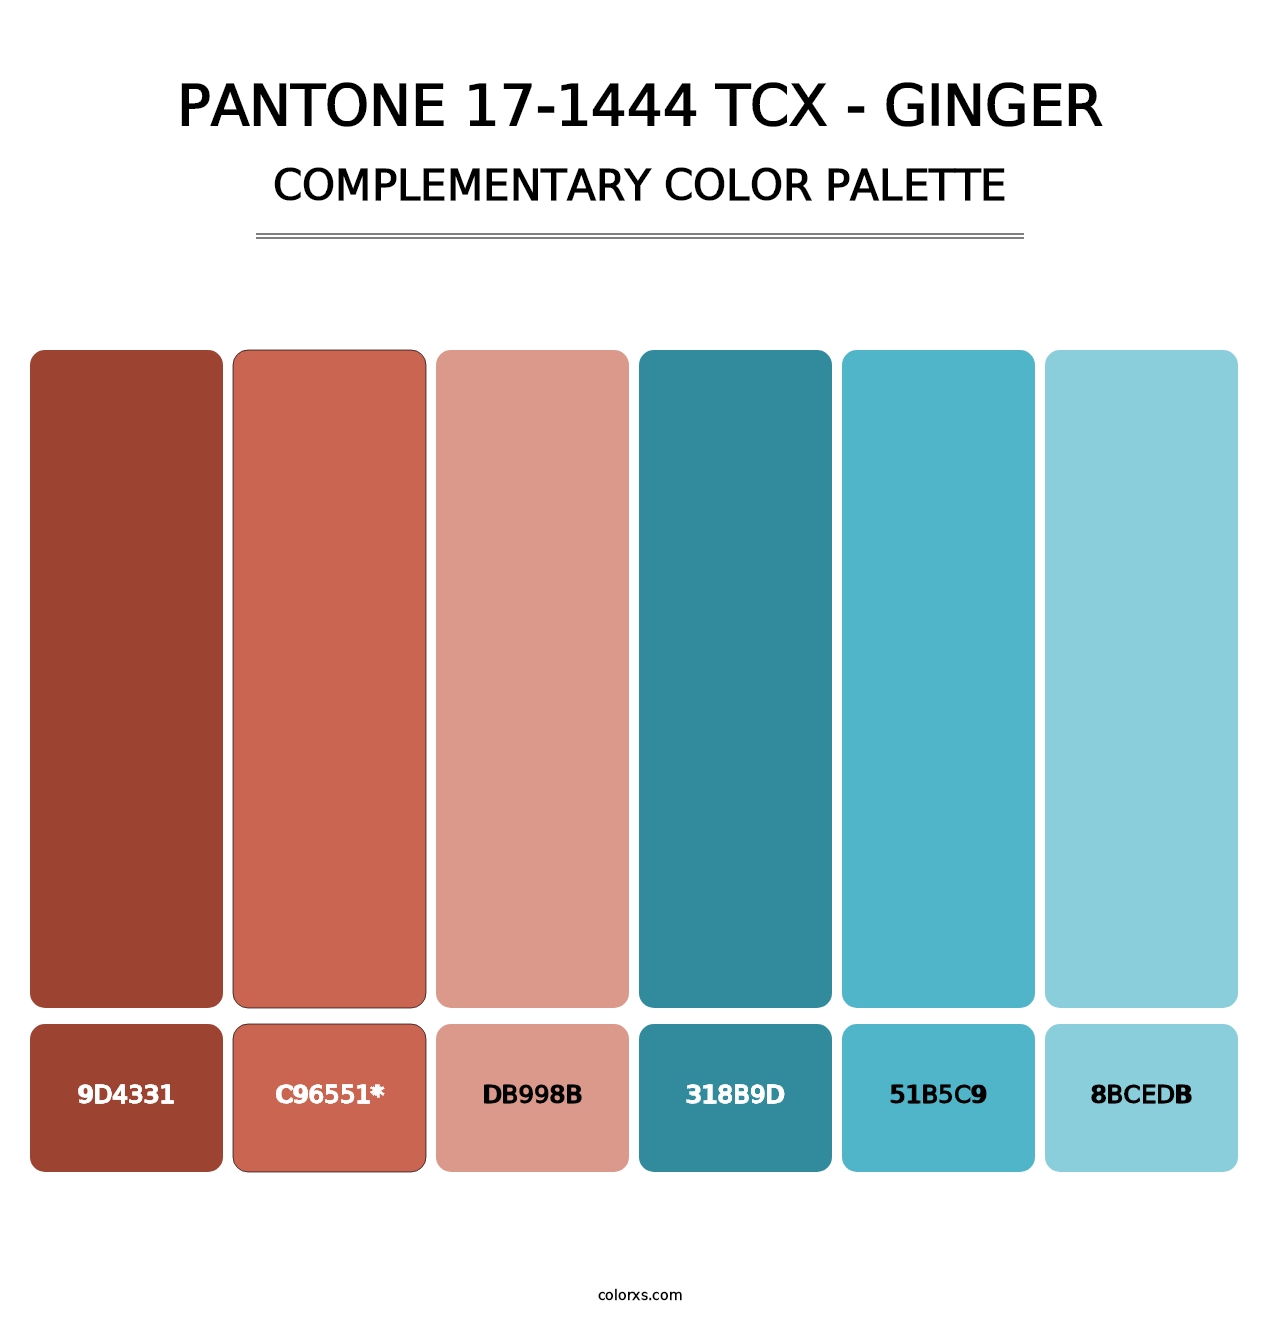 PANTONE 17-1444 TCX - Ginger - Complementary Color Palette